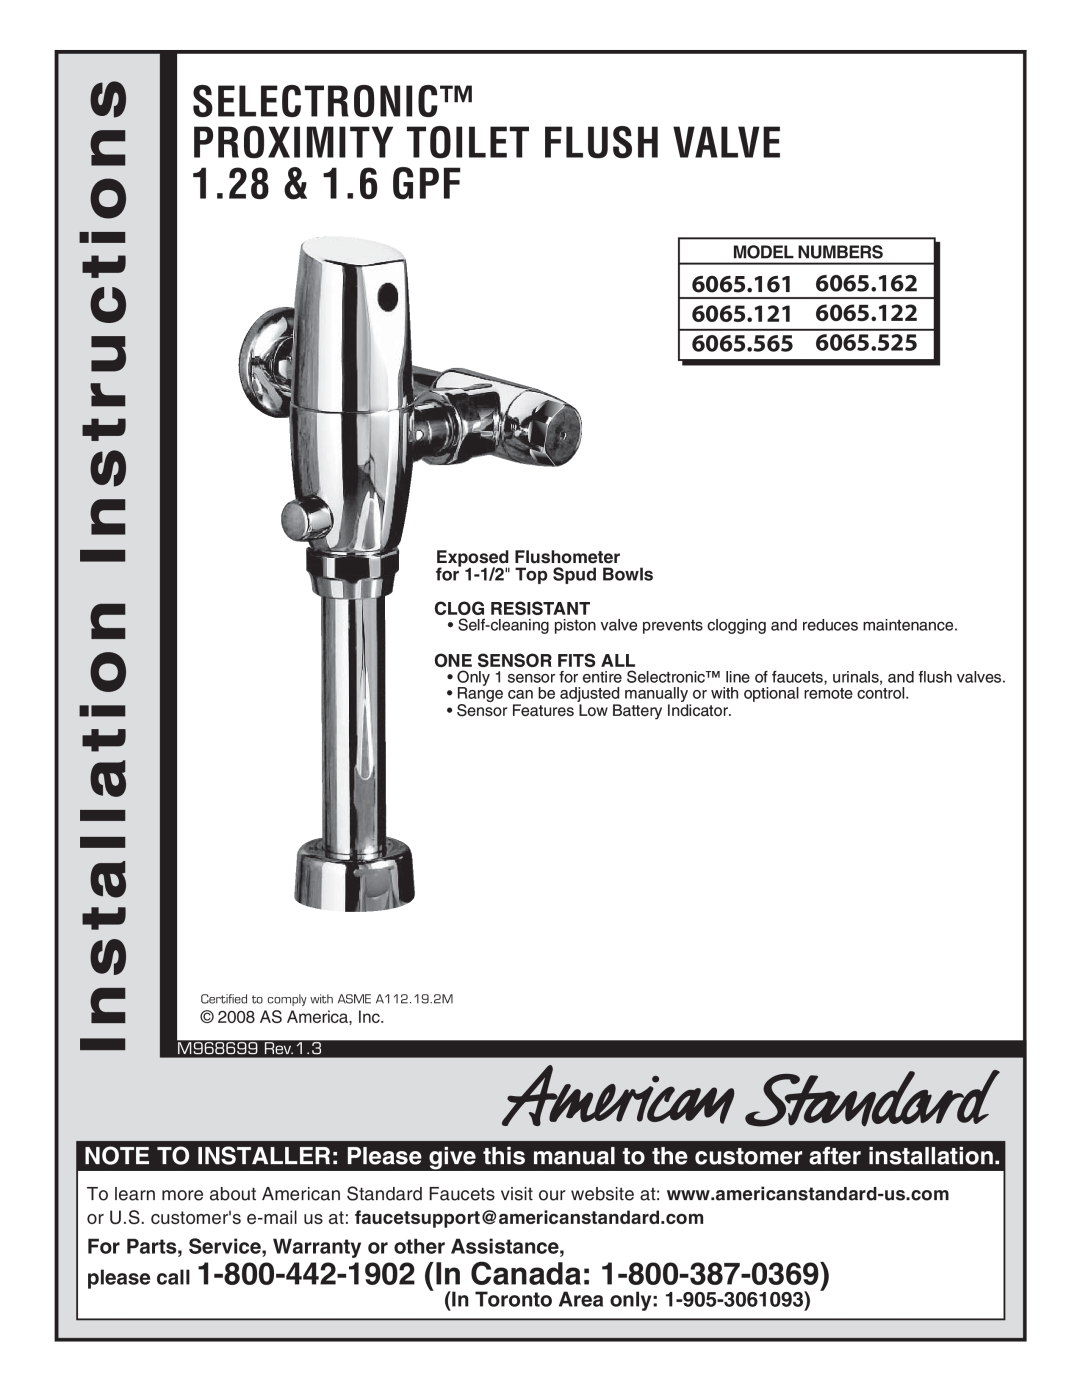 American Standard 6065.565 installation instructions For Parts, Service, Warranty or other Assistance, InTorontoArea onlly 